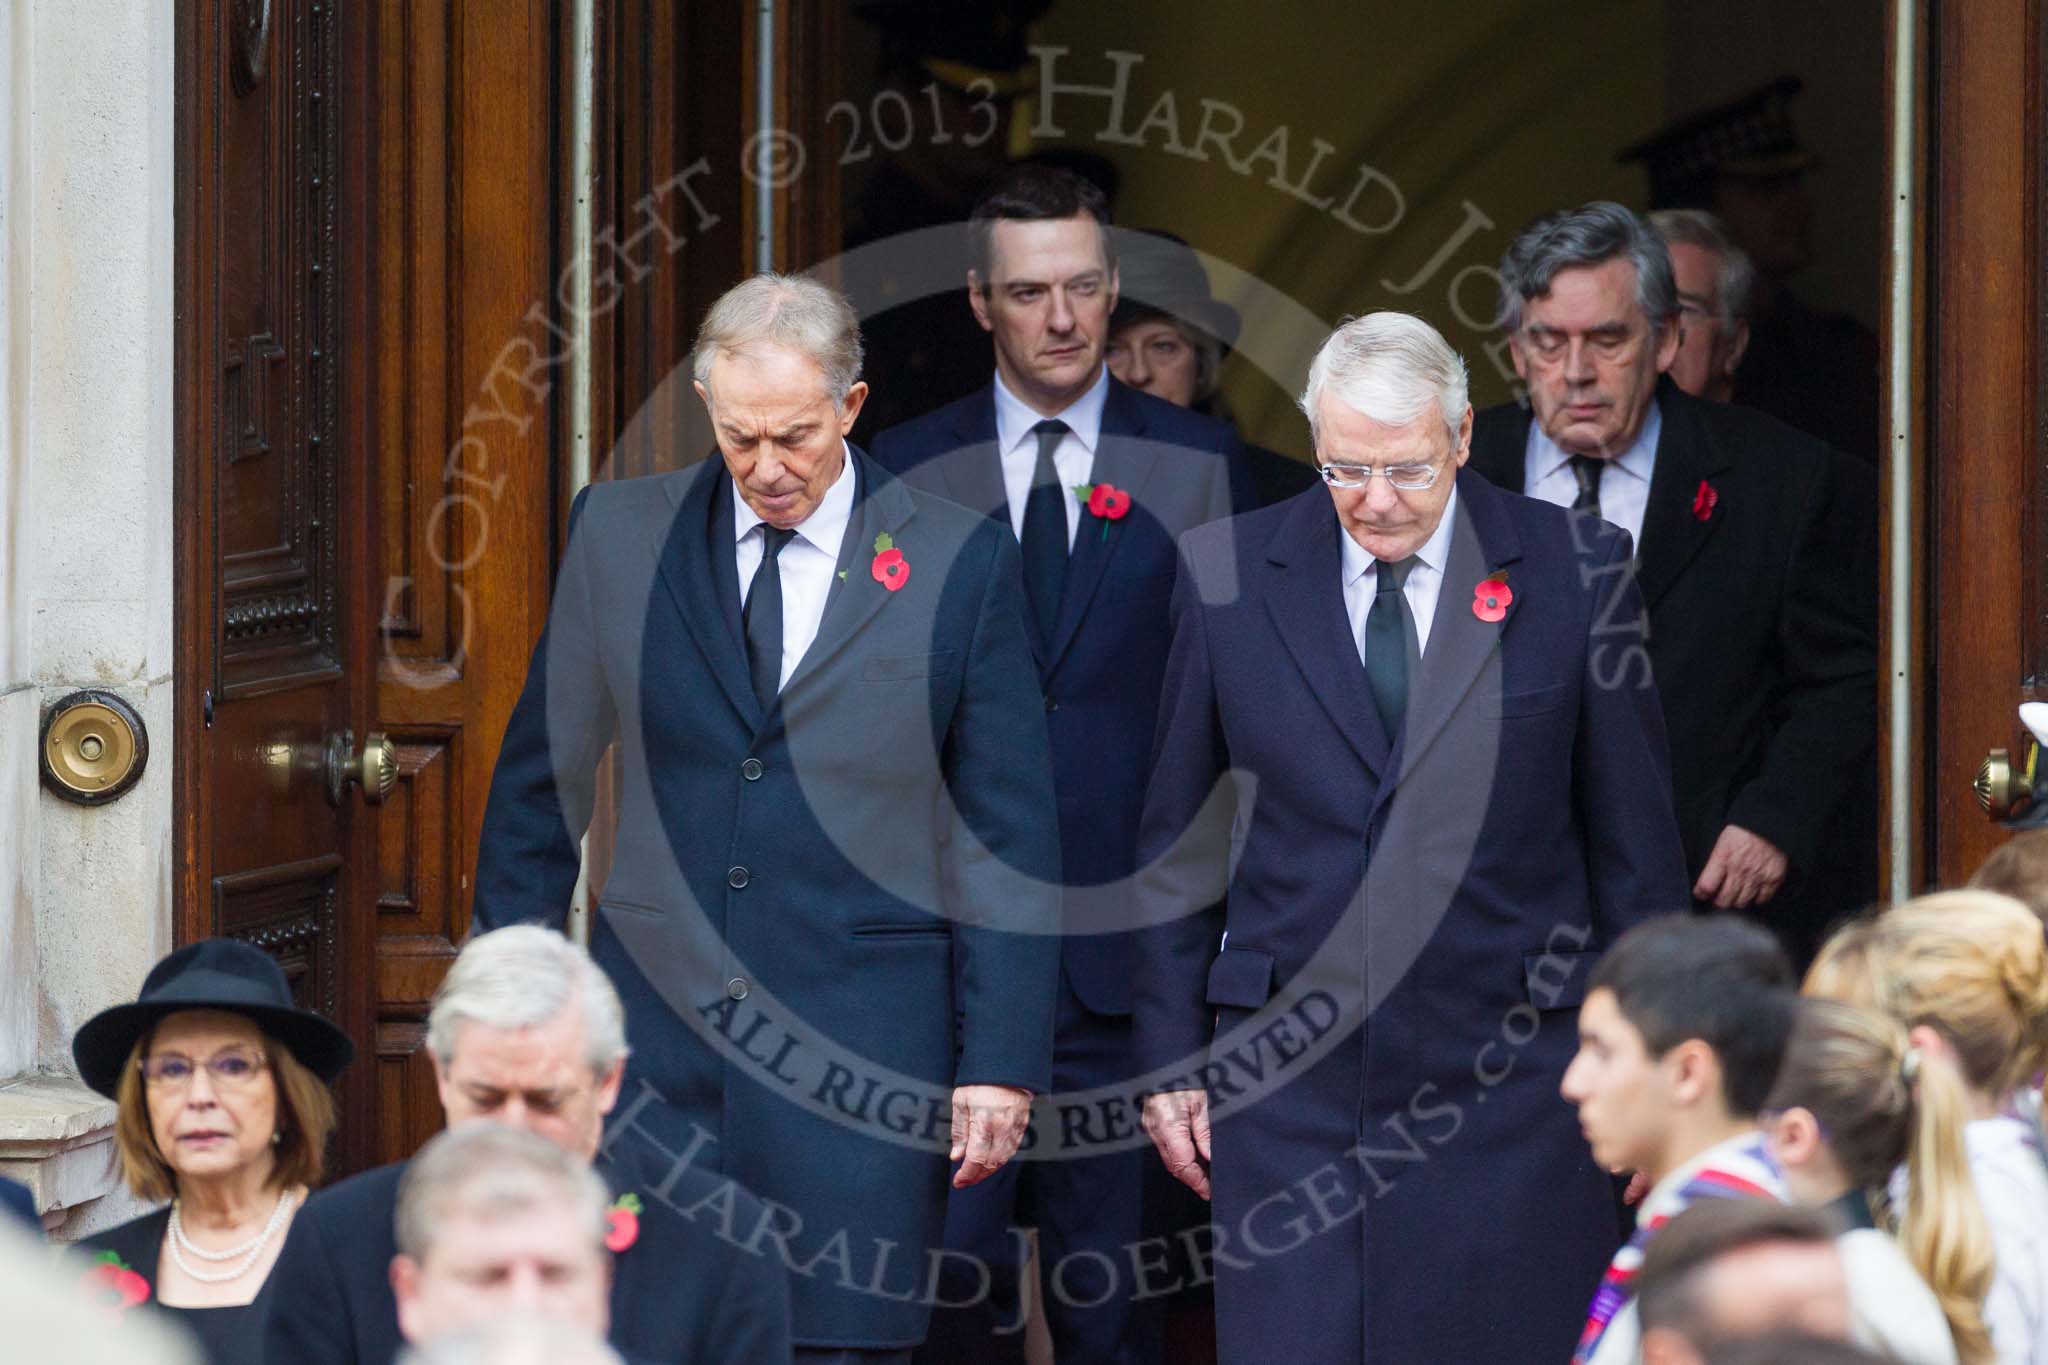 Remembrance Sunday at the Cenotaph 2015: The politicians leaving the Foreign- and Commonwealth Office, here former prime ministers Tony Blair and John Major, behind them George Osborne, Chancellor of the Exchequer, and former prime minister Gordon Brown. Image #88, 08 November 2015 10:55 Whitehall, London, UK